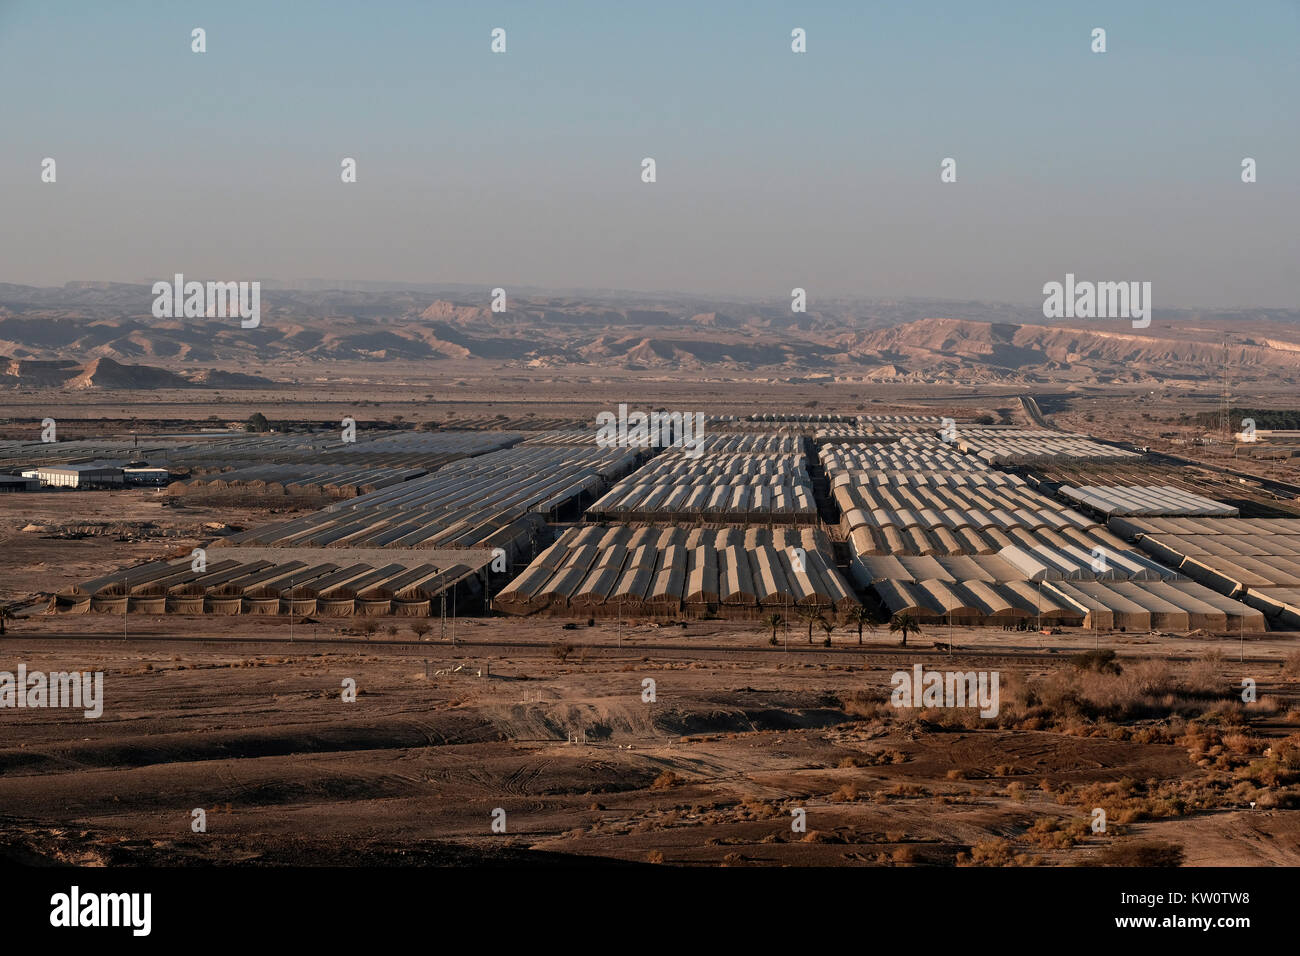 Aerial view of greenhouses in an agriculture field of the cooperative agricultural community of Paran located in the western of the Arabah valley known in Hebrew as Arava or Aravah which forms part of the border between Israel and Jordan. Stock Photo